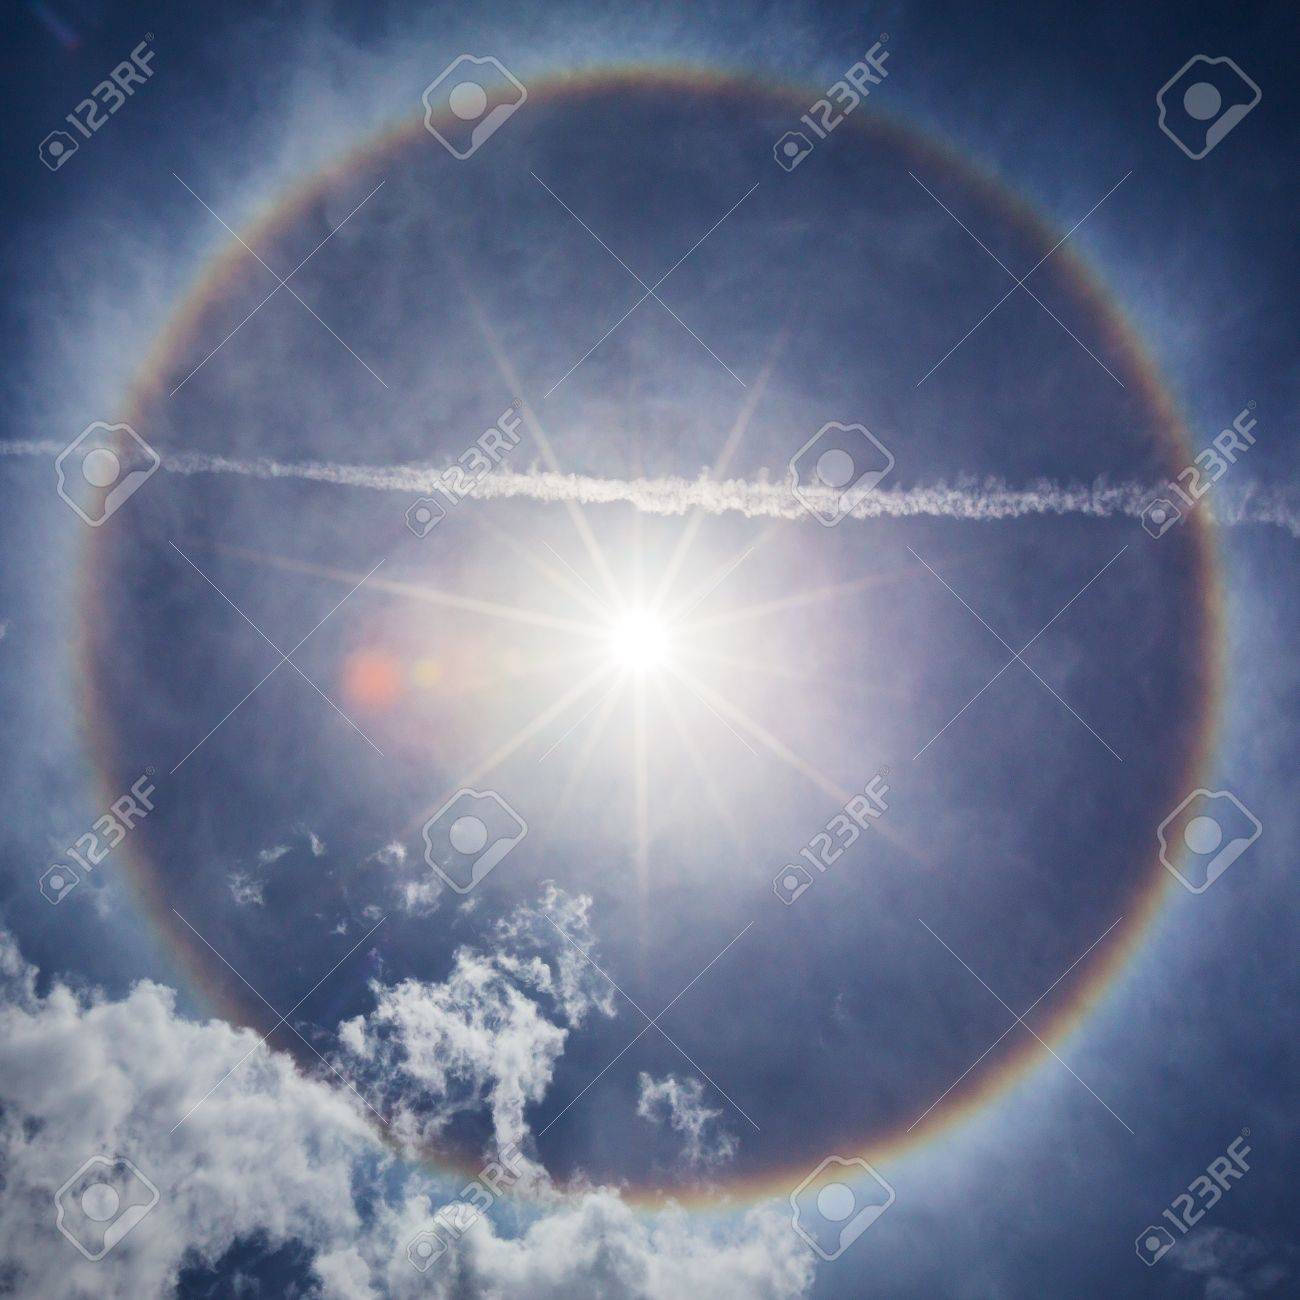 21823820-sun-with-circular-rainbow-sun-halo-occurring-due-to-ice-crystals-in-atmosphere